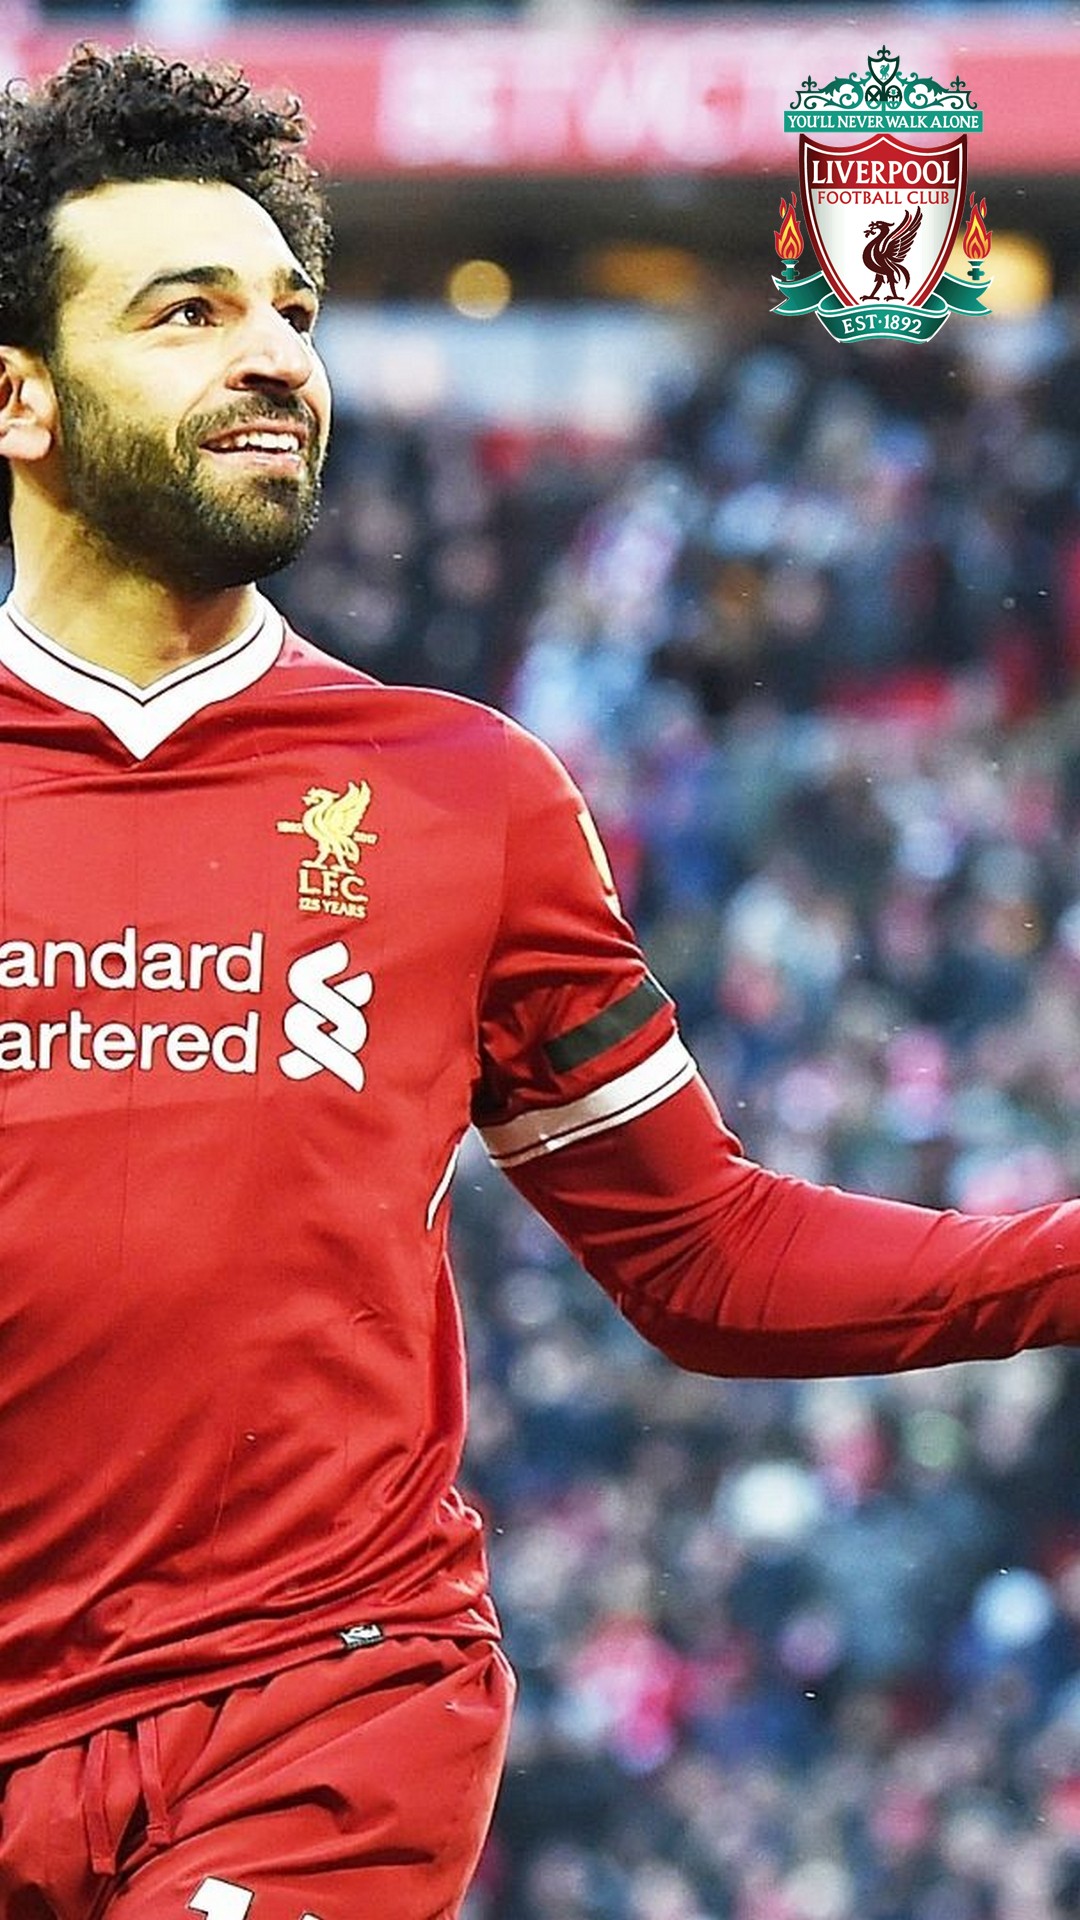 iPhone Wallpaper Mohamed Salah Liverpool with image resolution 1080x1920 pixel. You can make this wallpaper for your iPhone 5, 6, 7, 8, X backgrounds, Mobile Screensaver, or iPad Lock Screen